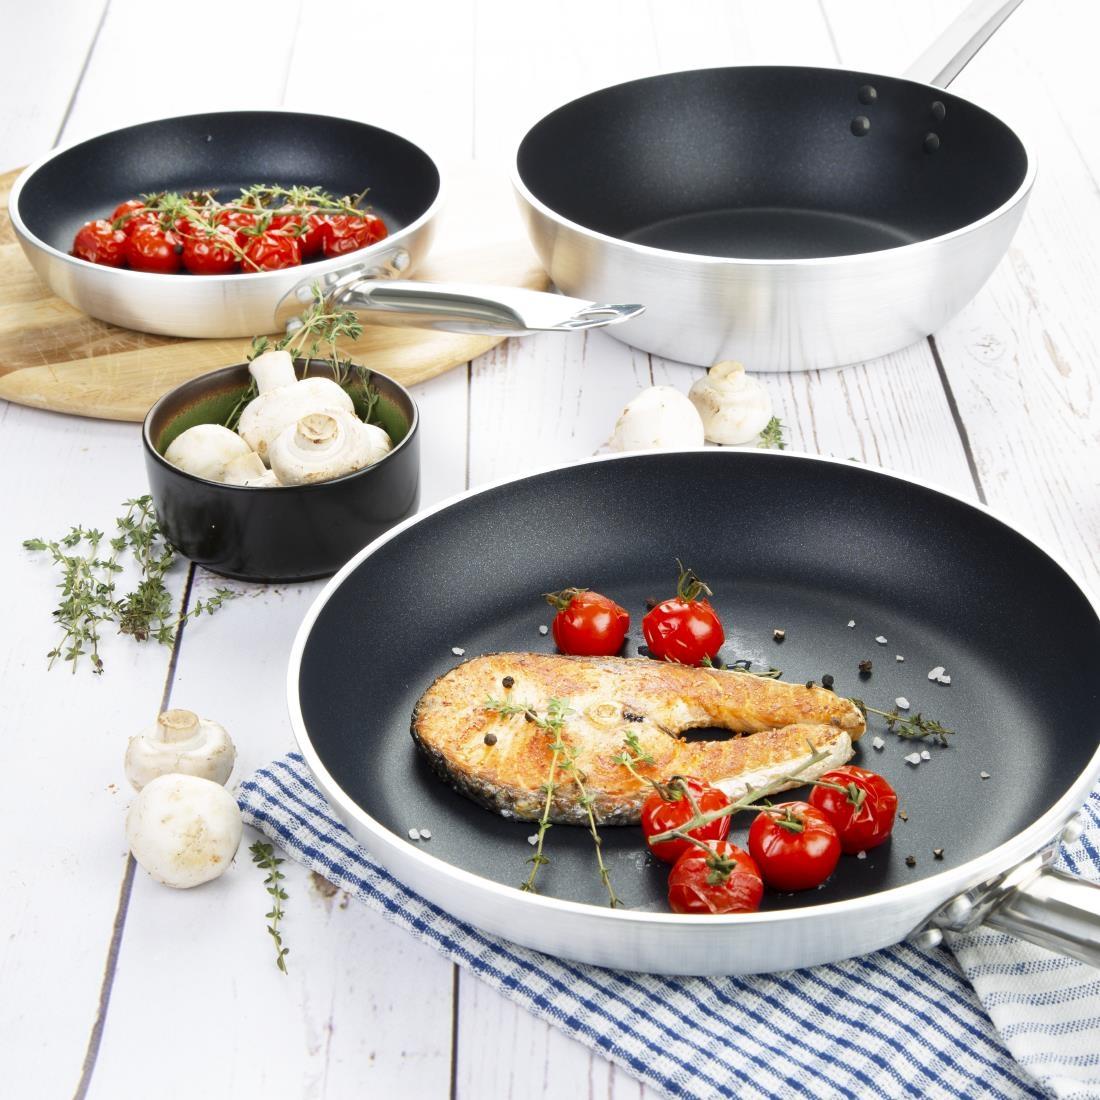 Vogue Cook Like A Pro 3-Piece Non-Stick Induction Frying Pan and Saute Pan Set